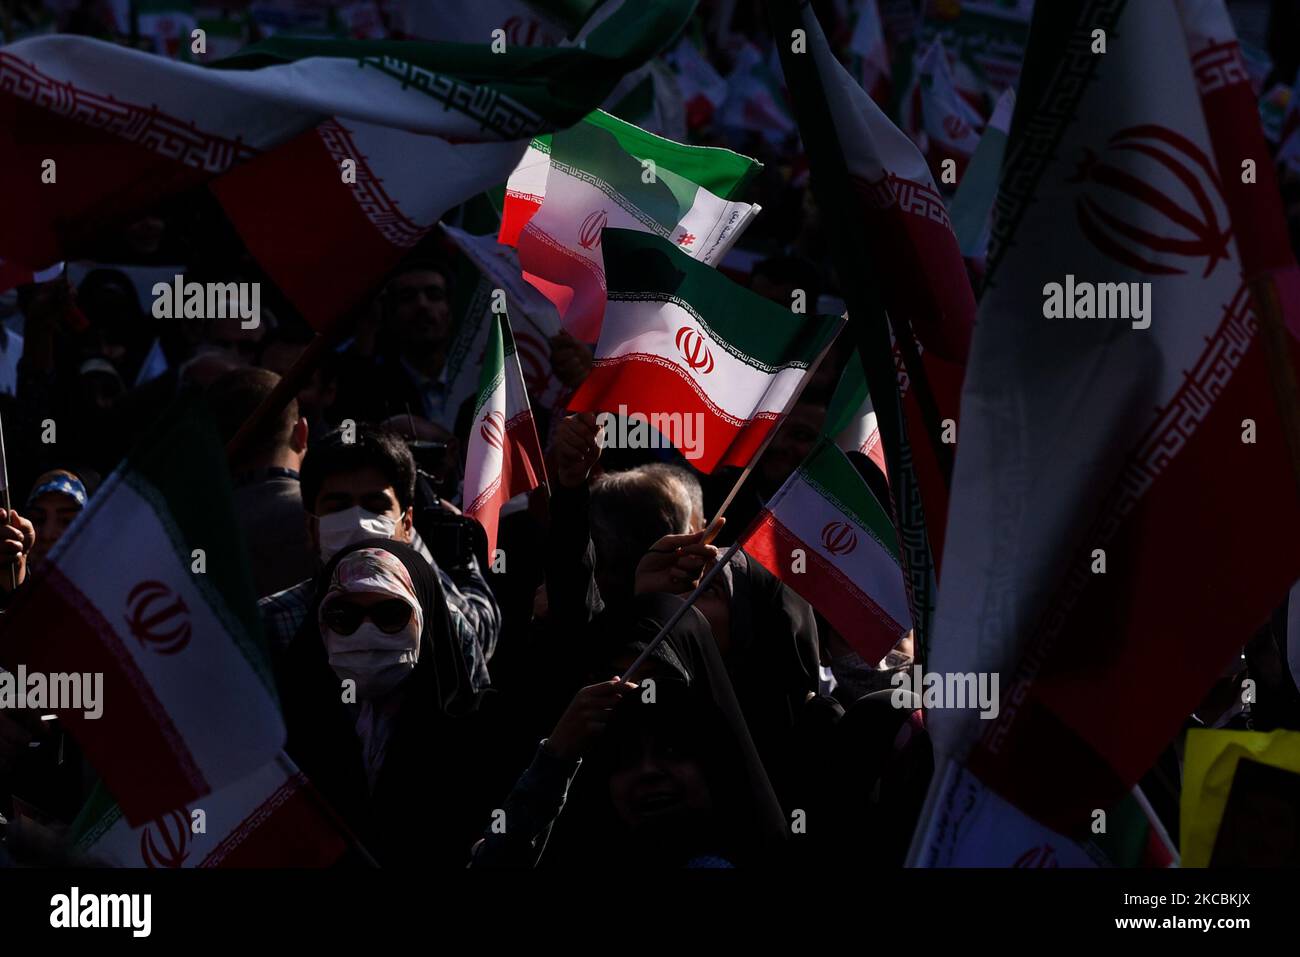 Tehran, Iran. 04th Nov, 2022. A woman waves the Iranian flags during a demonstration in front of the former U.S. Embassy in Tehran, Iran, Friday, Nov. 4, 2022. Iran on Friday marked the 1979 takeover of the U.S. Embassy in Tehran as its theocracy faces nationwide protests after the death of a 22-year-old woman earlier arrested by the country's morality police. (Photo by Sobhan Farajvan/Pacific Press) Credit: Pacific Press Media Production Corp./Alamy Live News Stock Photo